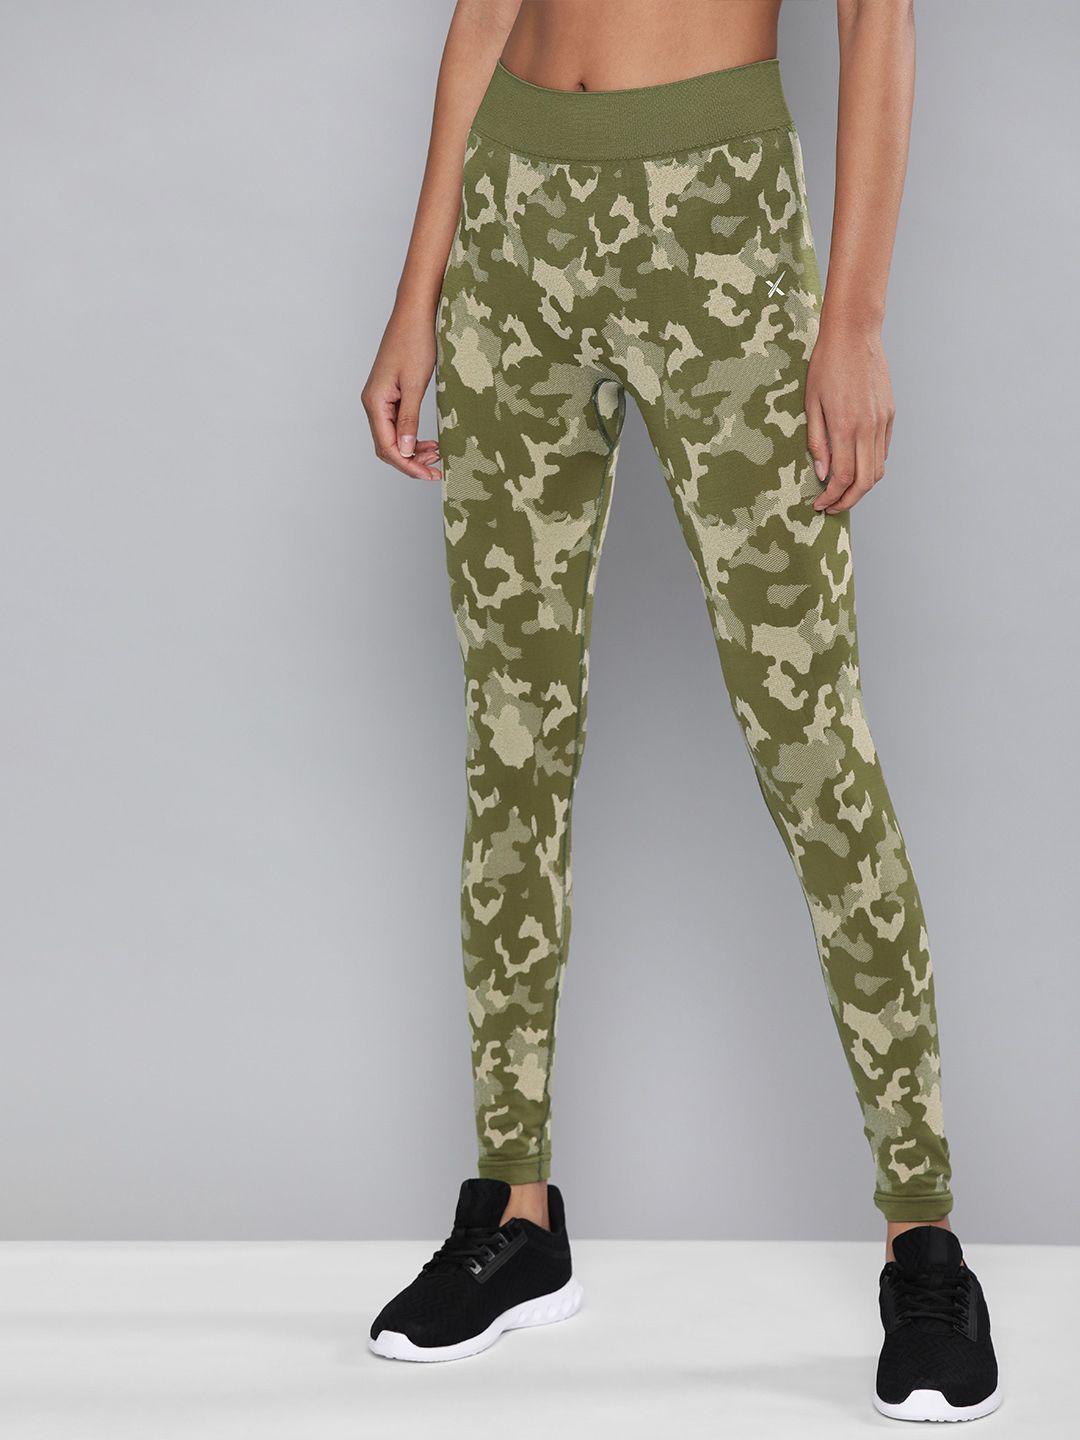 HRX by Hrithik Roshan Women Olive Green Camo Printed Rapid-Dry Running Tights Price in India